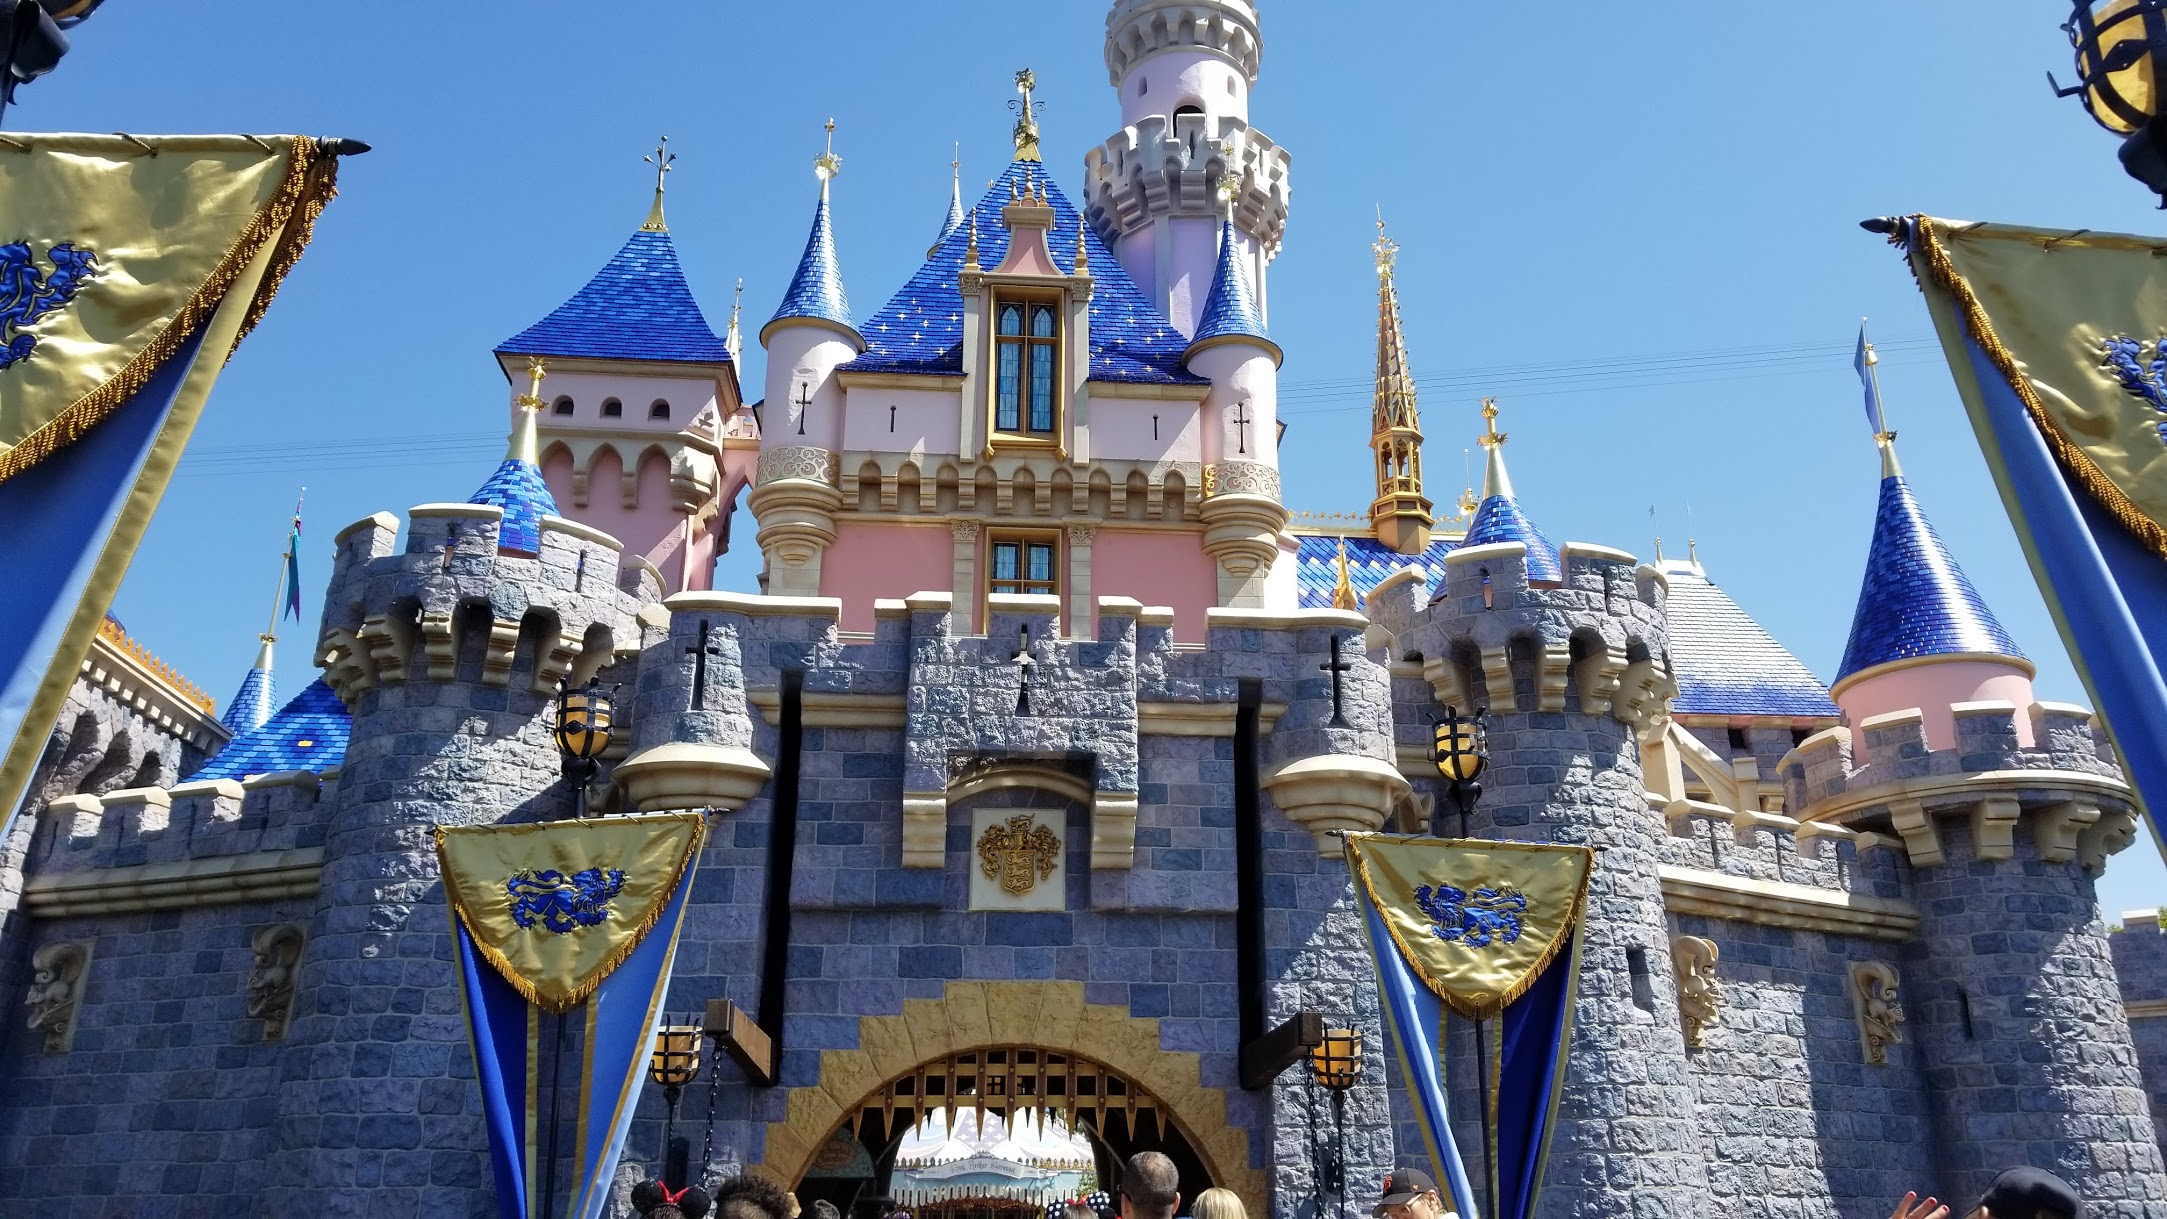 California moves into the Orange tier now Disneyland can open to more guests!